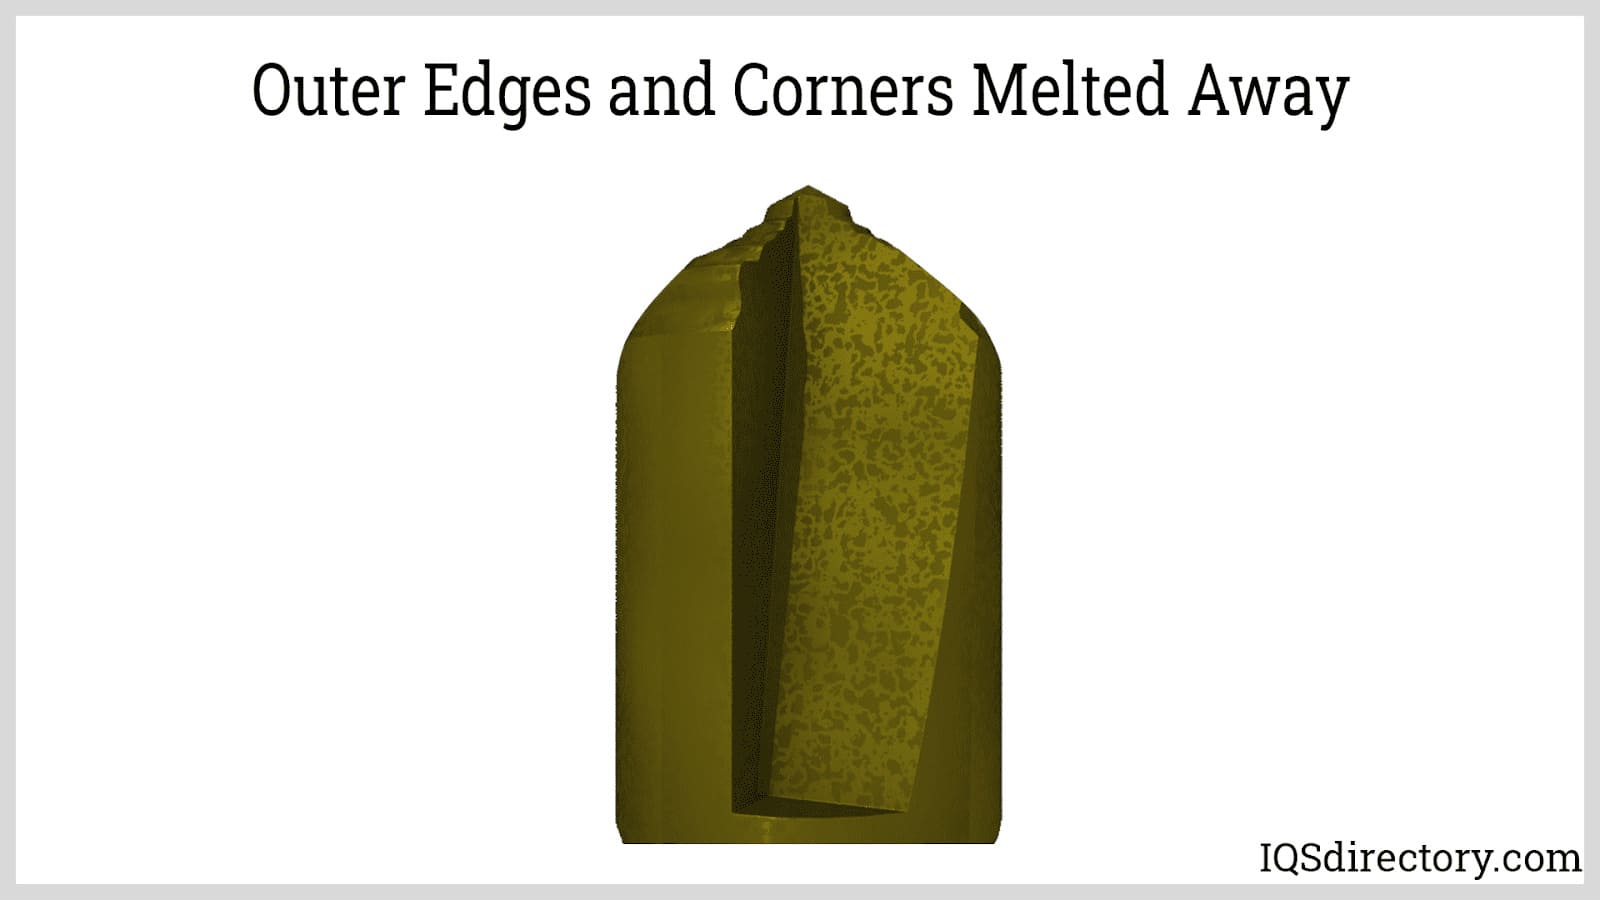 Outer Edges and Corners Melted Away